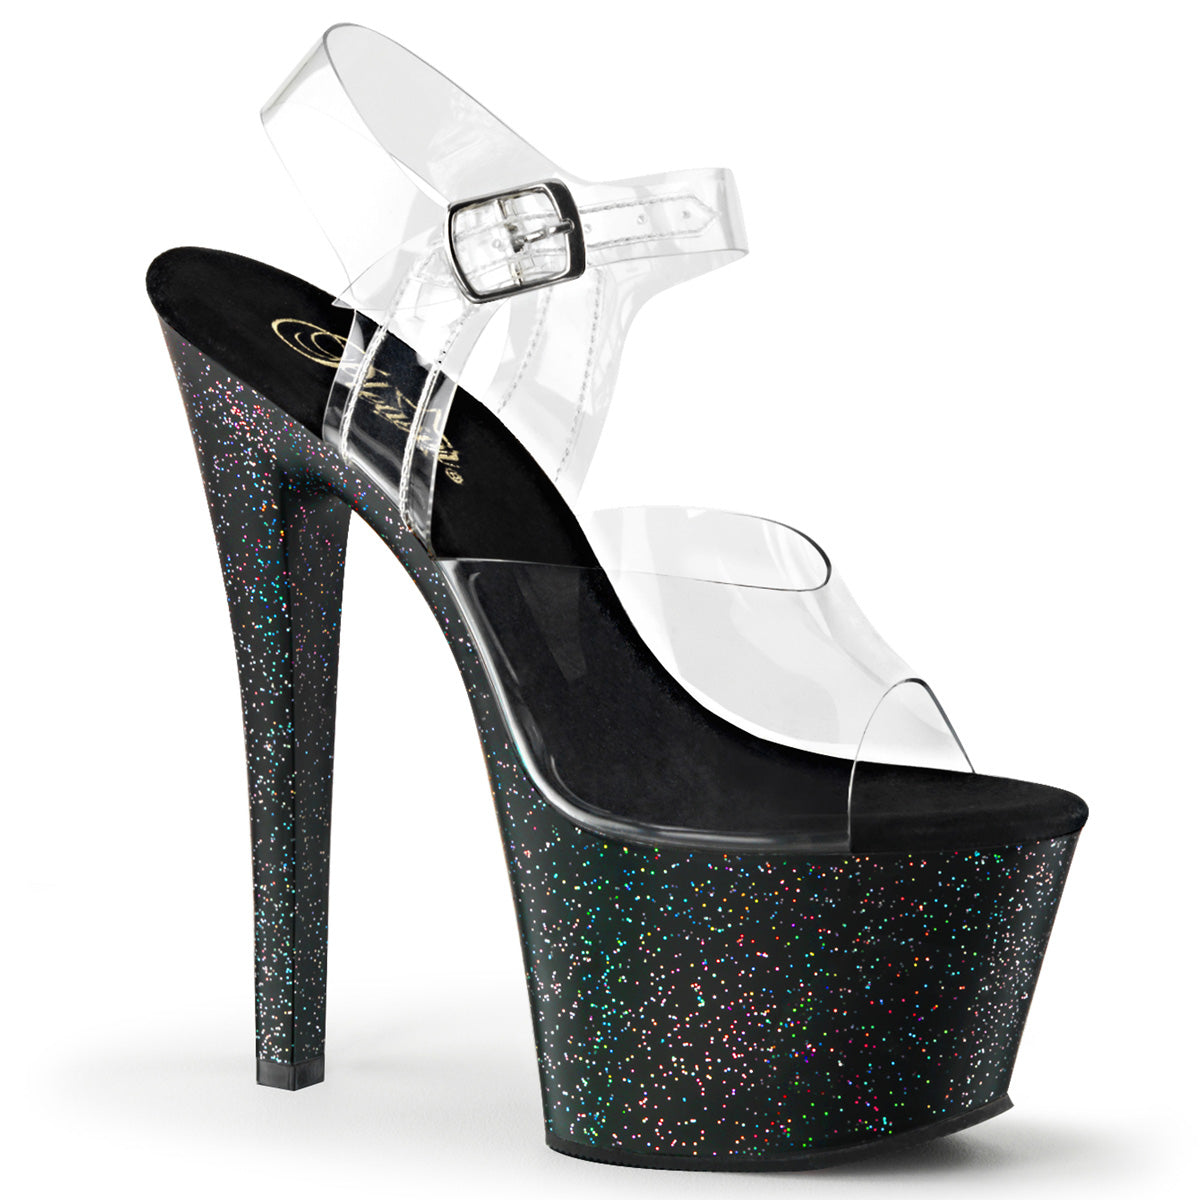 Sky-308 mg 7 inch Heel Clear and Black Pole Dancing-platforms